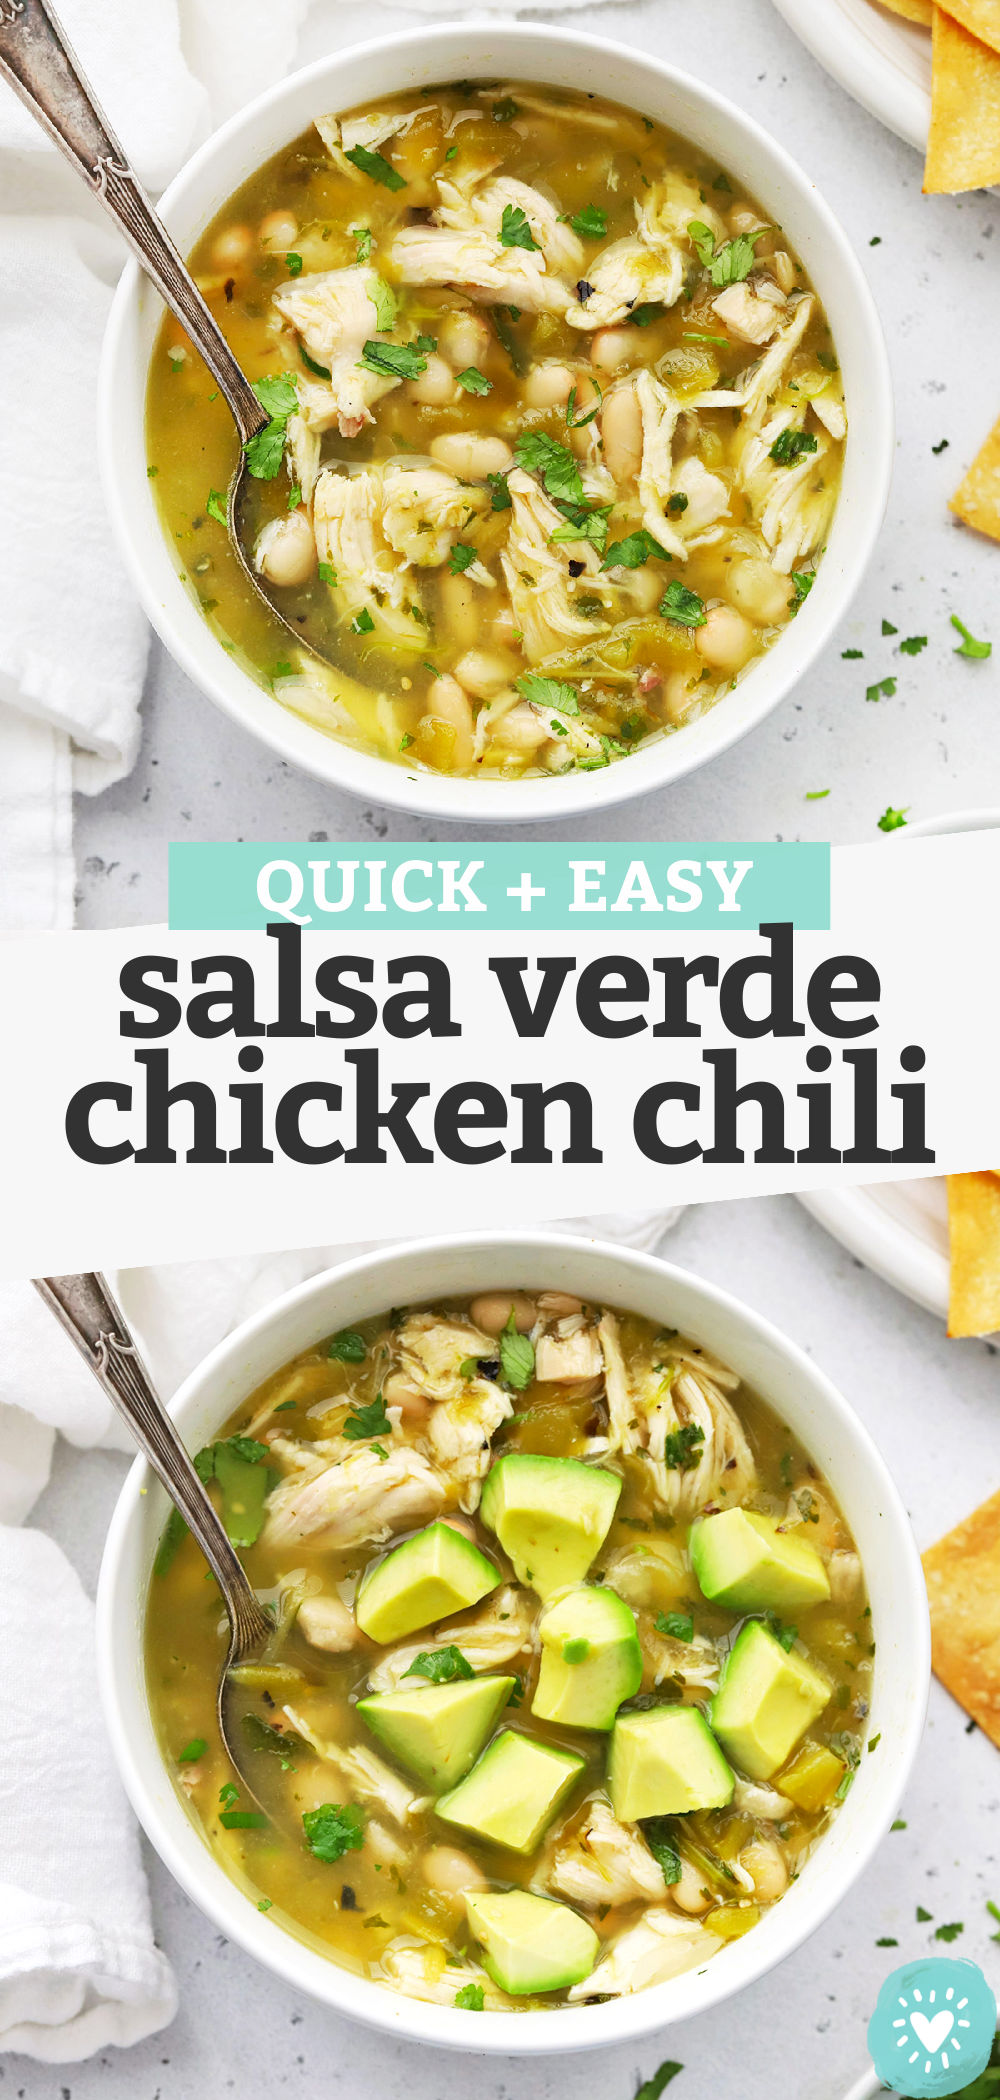 Salsa Verde Chicken Chili - This might be the EASIEST chili recipe ever! Just 7 ingredients + 15 minutes and you're ready to enjoy this lighter take on chili night. (Gluten-Free + Easy!) // White Chicken Chili // Healthy Chili Recipe // Chicken Chili Recipe // Healthy Soup